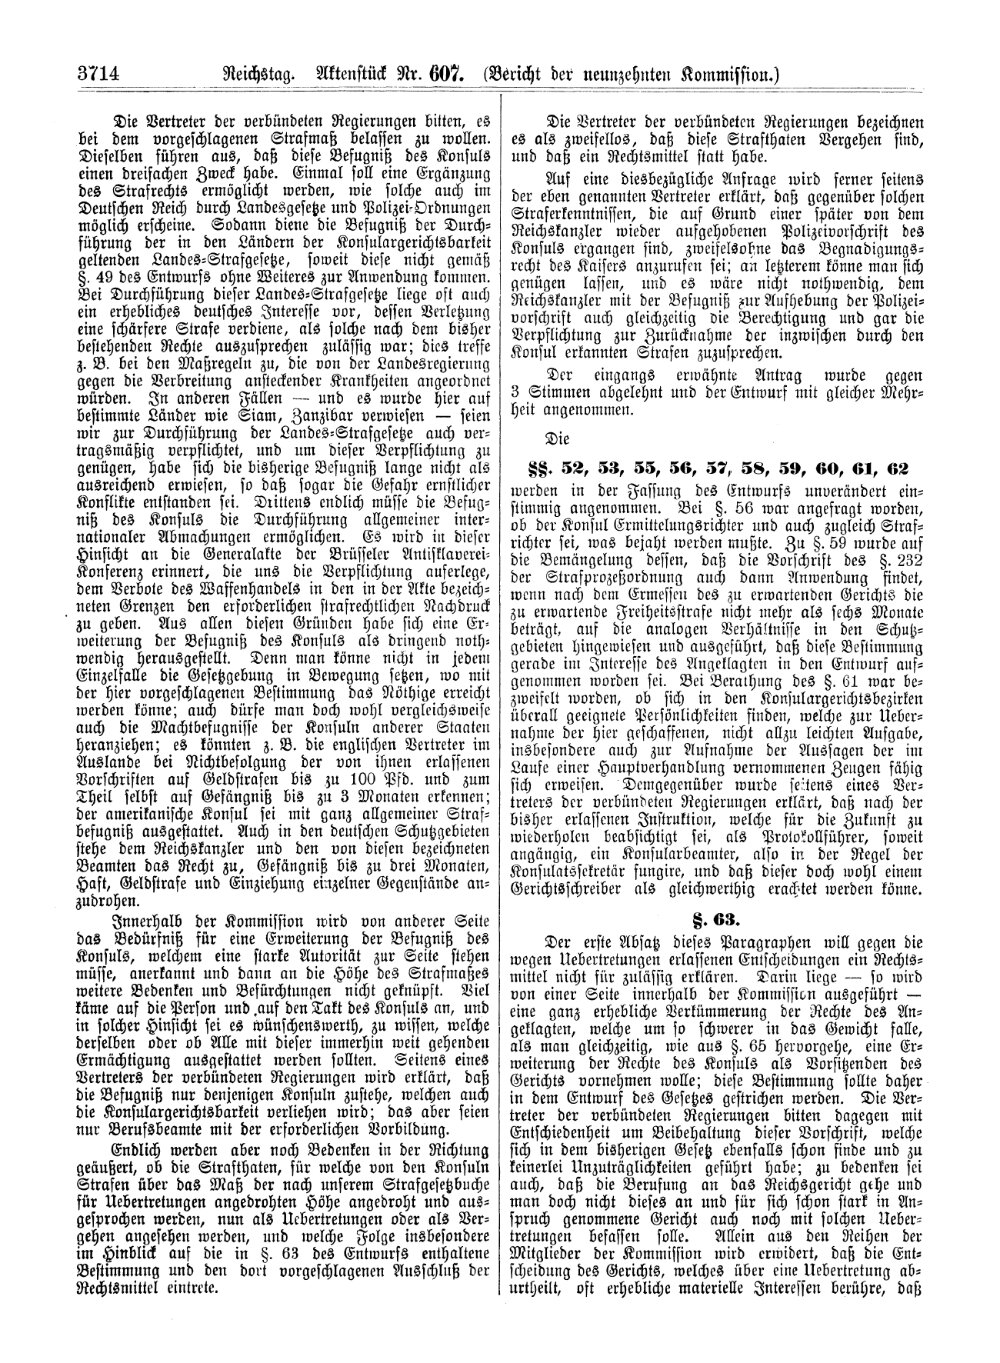 Scan of page 3714